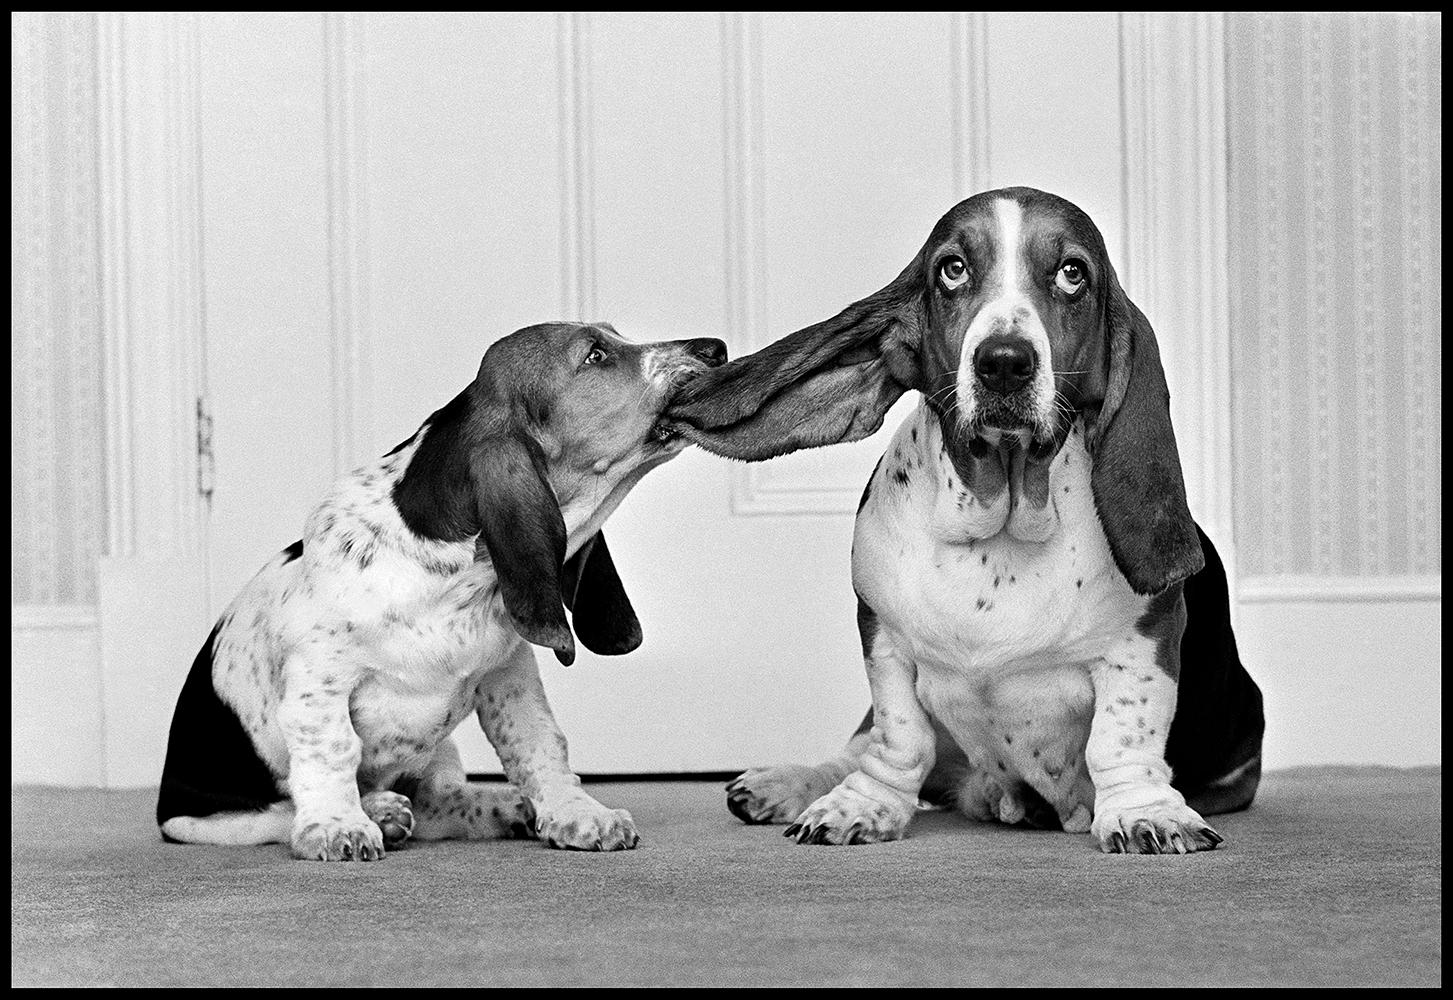 Lend Me Your Ear Daffy And Joyful 1960

By Arthur Steel 

Paper size: 44 x 33.5" / 112 x 85 cm

Silver Gelatin Print
1960 (printed later)
unframed
hand signed
limited edition of 30

note other print sizes and framing options are available, please